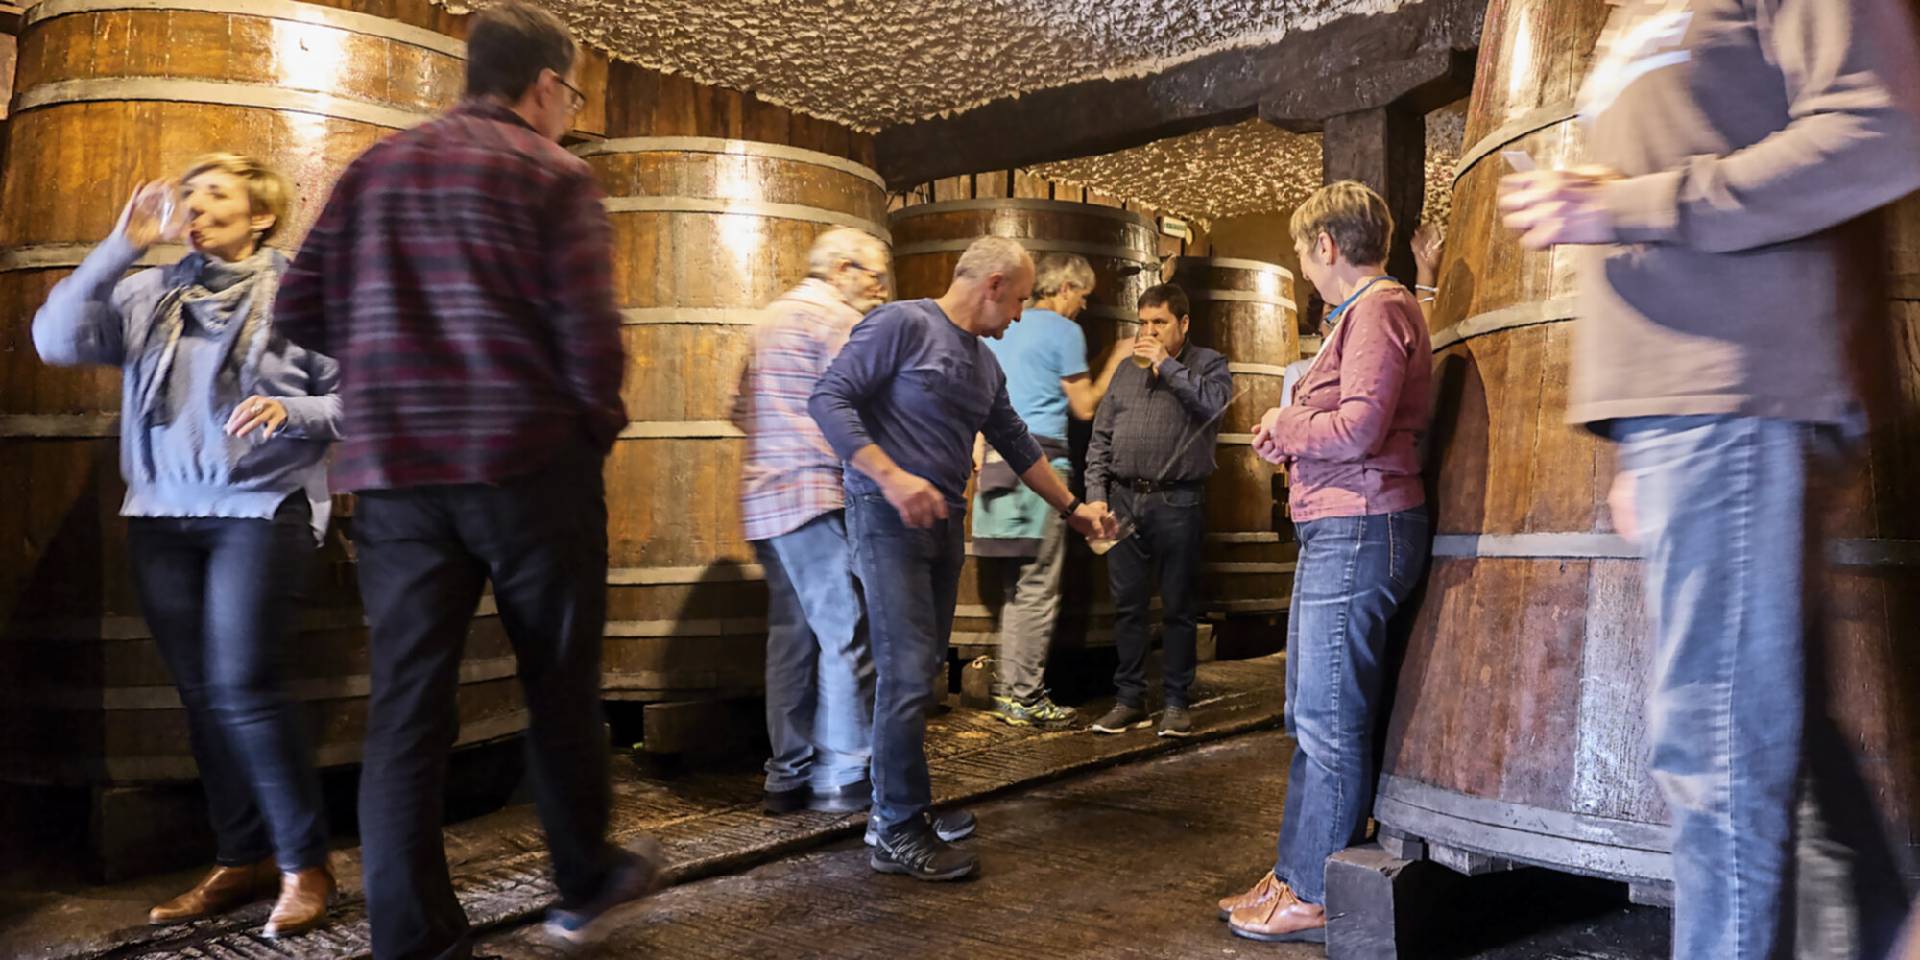 Group celebrating the new cider season in a cellar